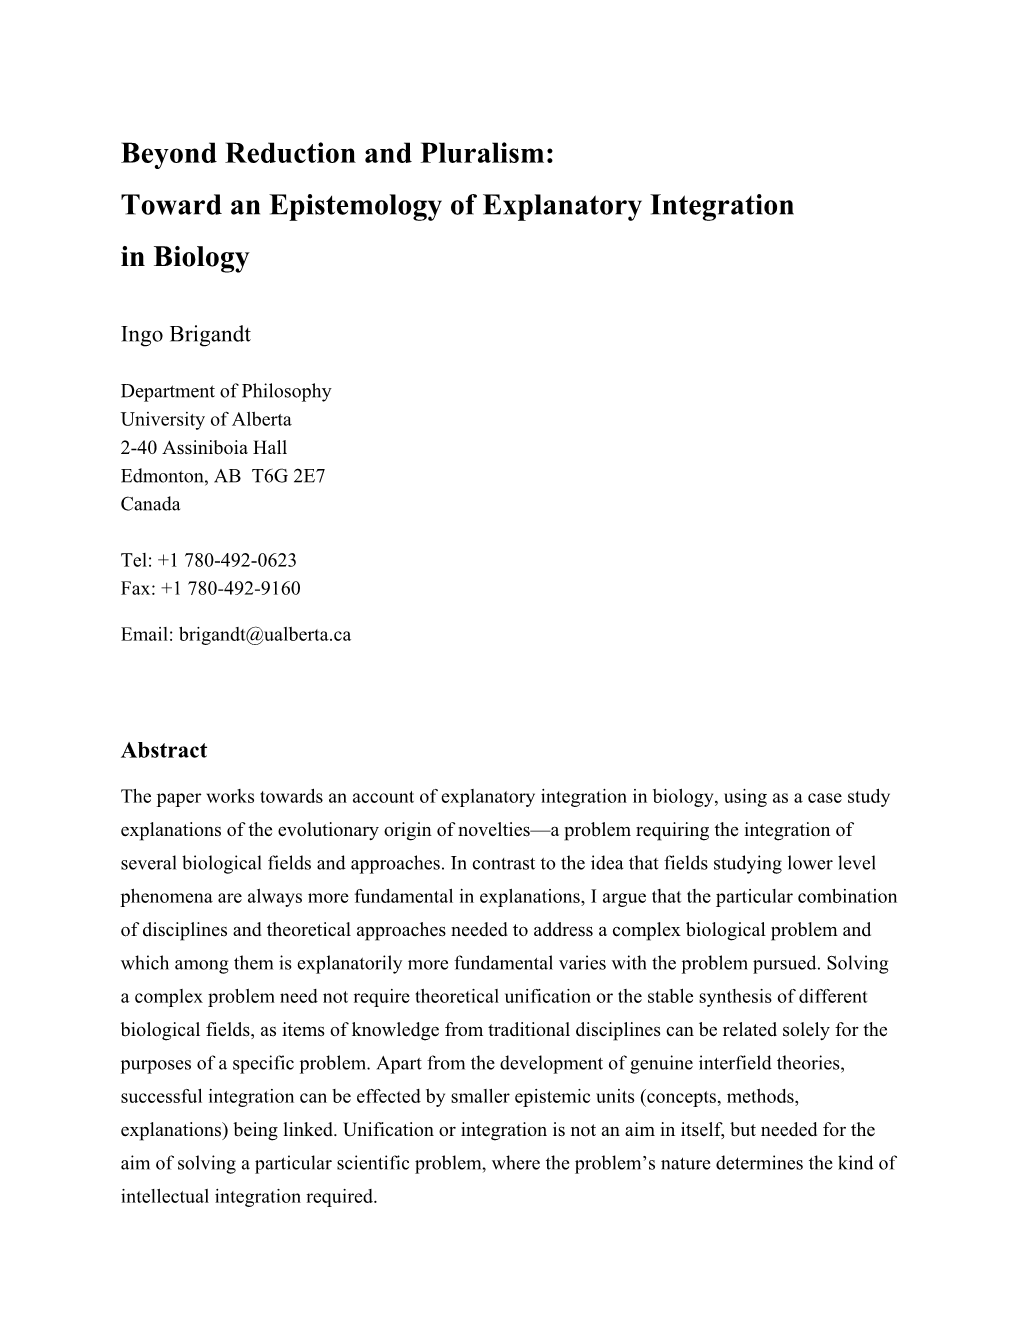 Beyond Reduction and Pluralism: Toward an Epistemology of Explanatory Integration in Biology